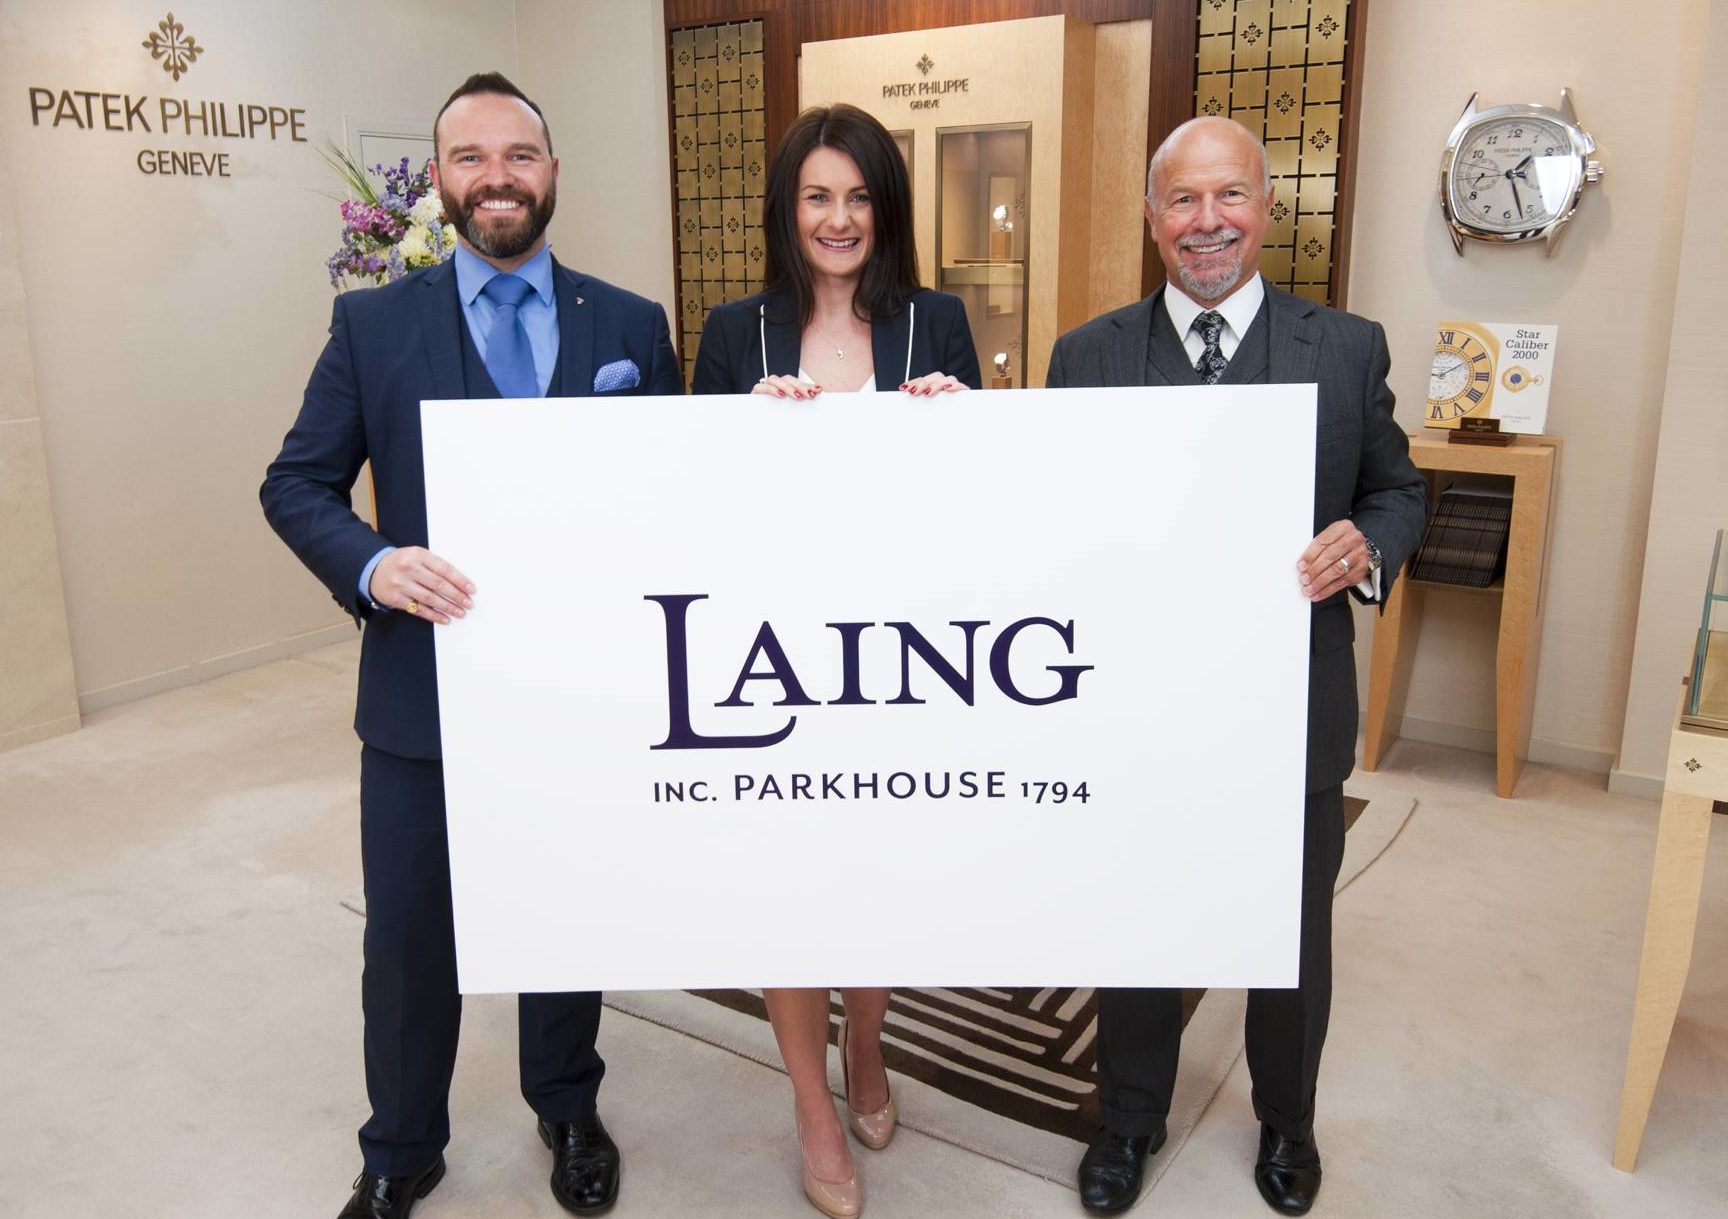 Laing move to national brand pictured from left to right director richard laing with karla ducker gm parkhouse in hampshire and chairman michael laing obe e1495012855839